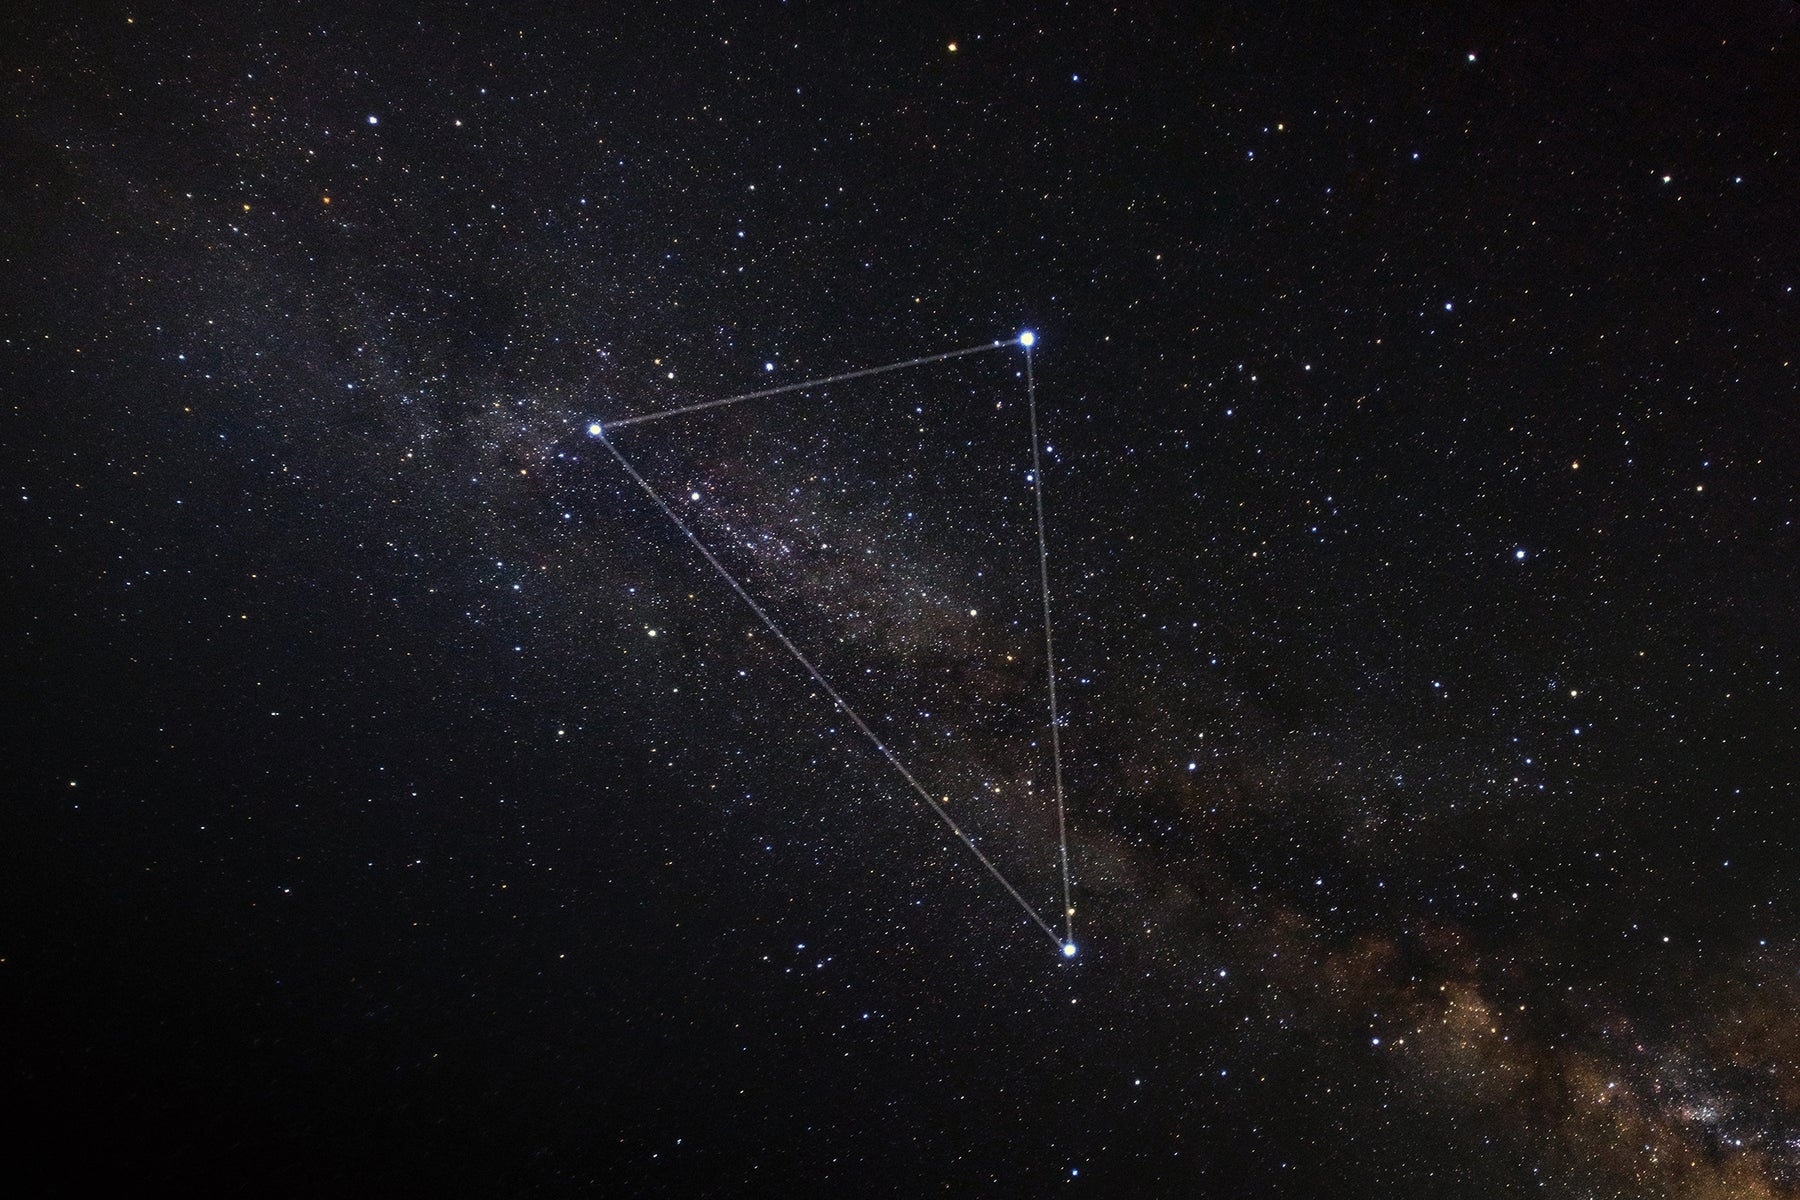 Visit the Summer Triangle asterism!